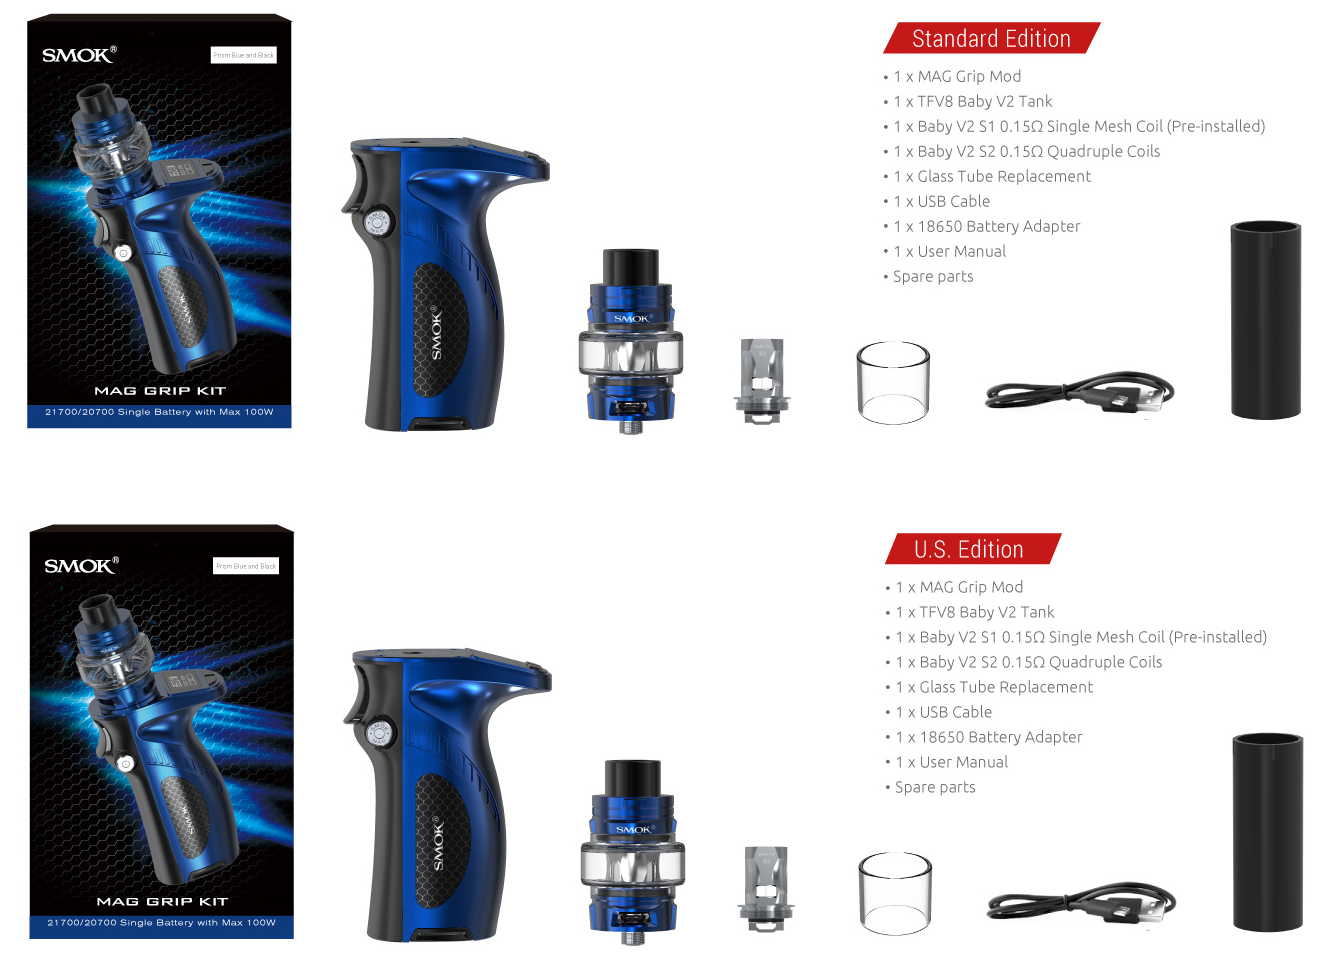 The Kit Includes of SMOK Mag Grip 